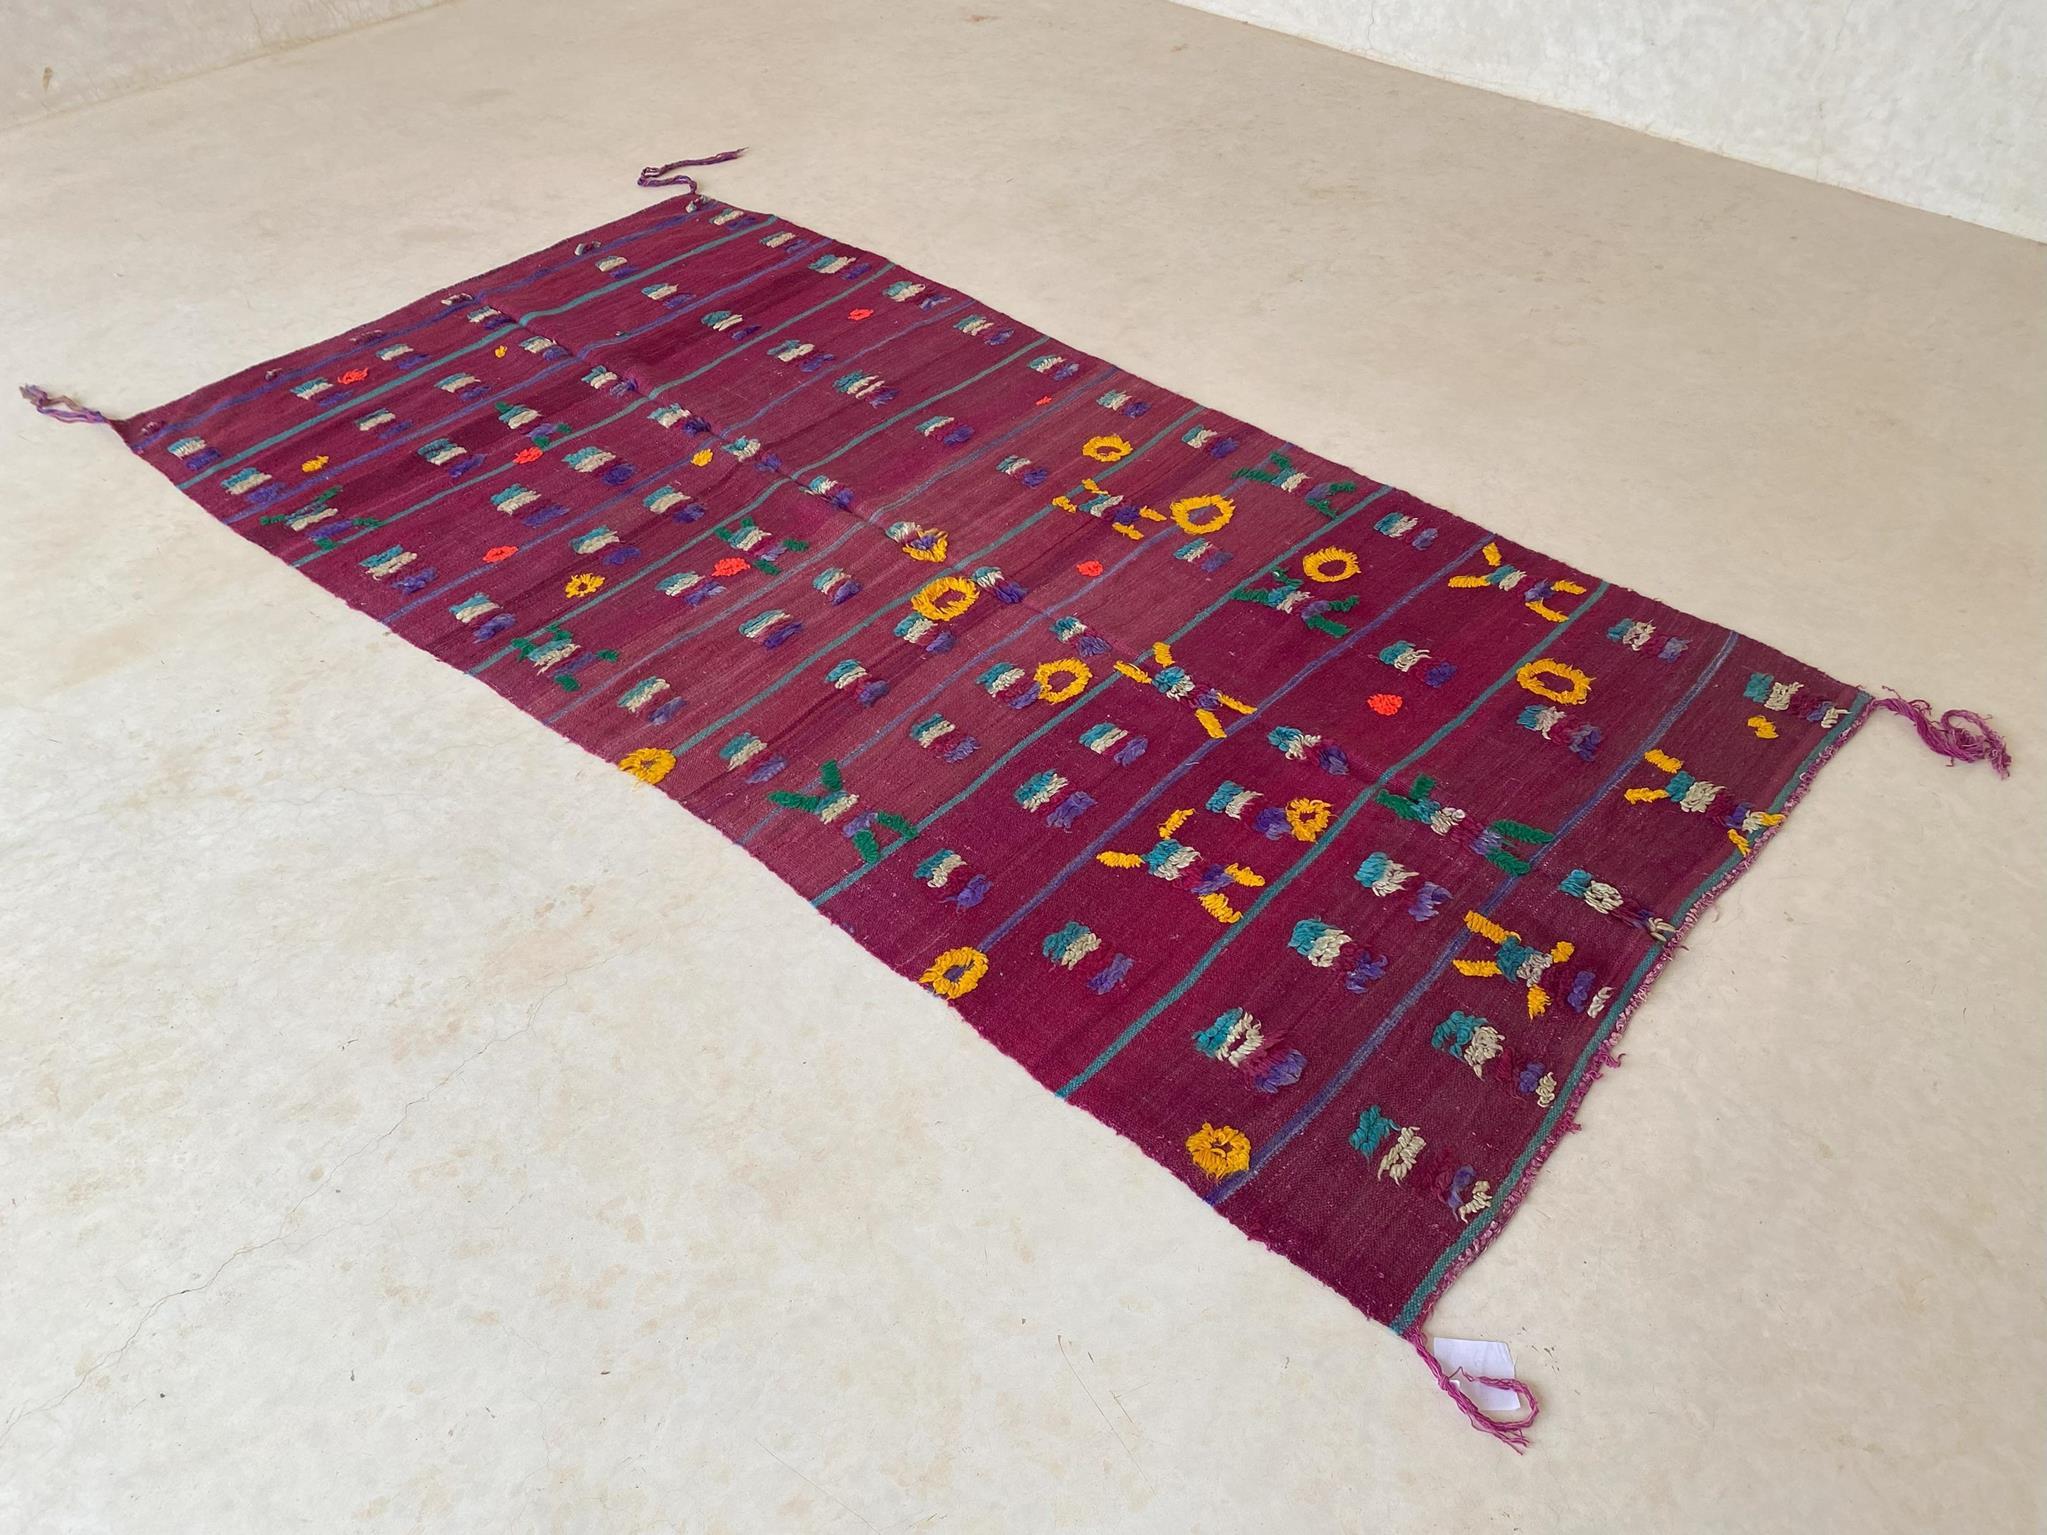 Tribal Vintage Moroccan Kilim textile - Purple and yellow - 4.1x8.3feet / 127x252cm For Sale